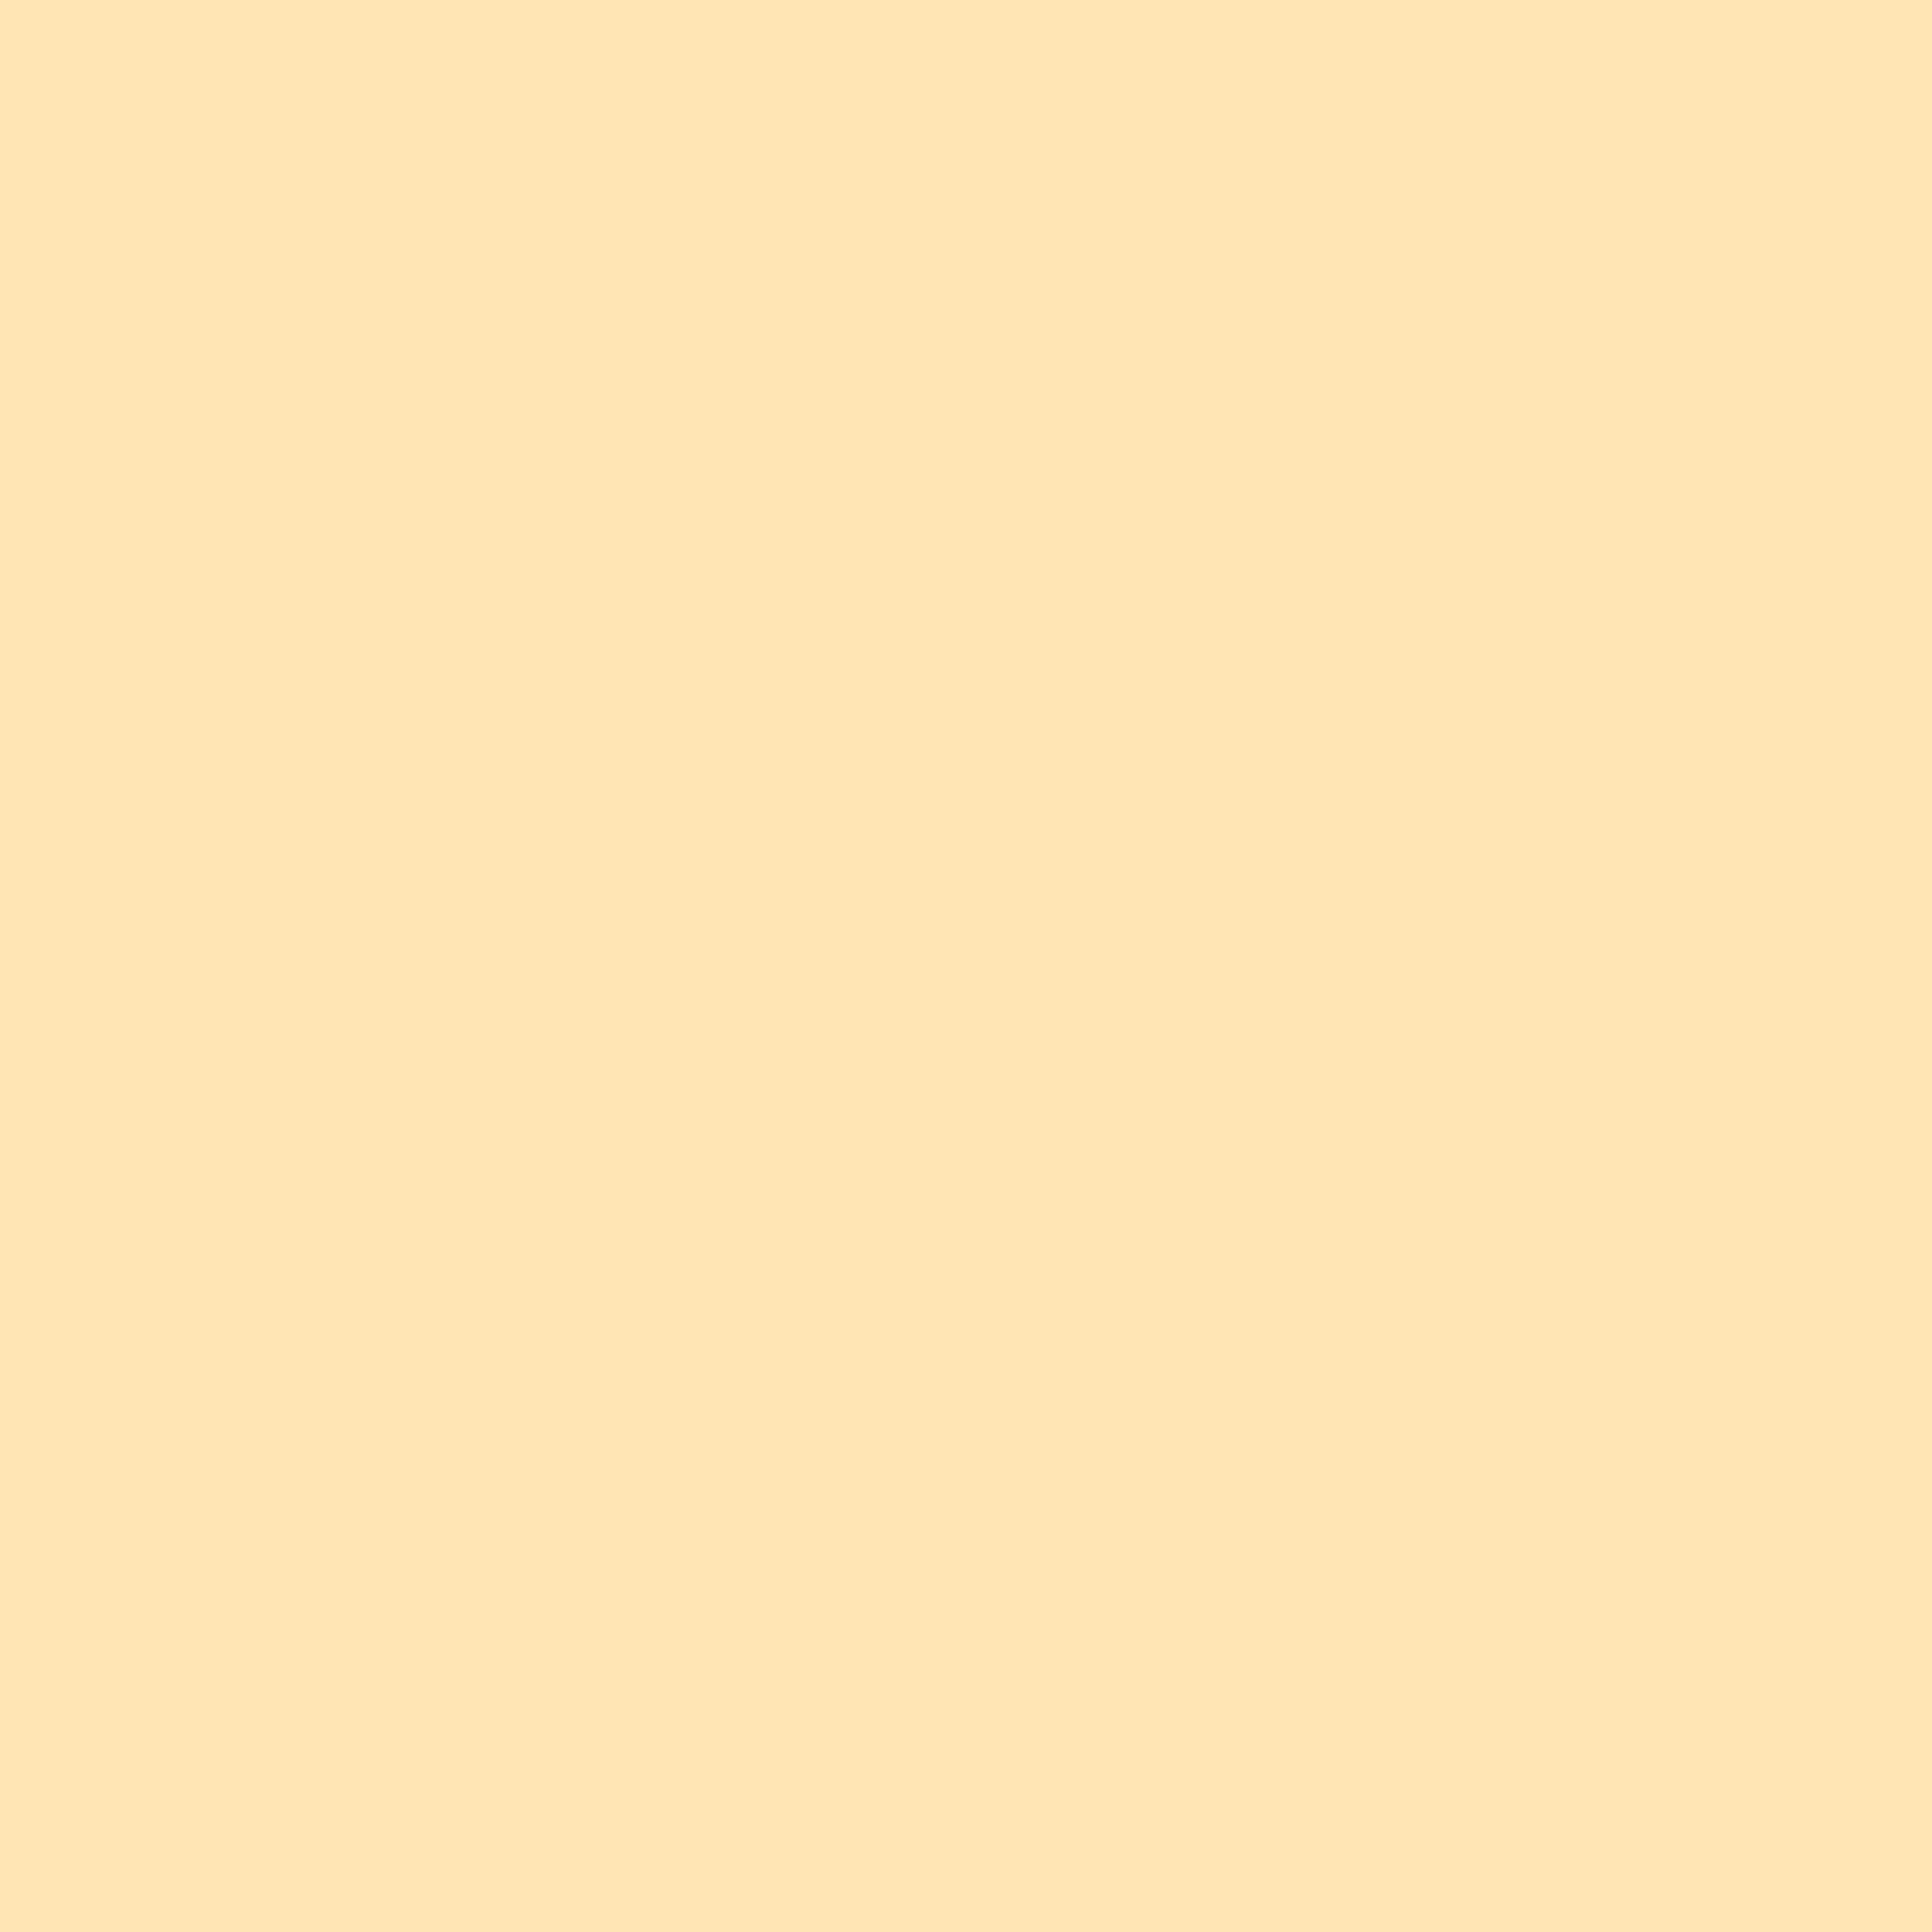 2732x2732 Peach Solid Color Background